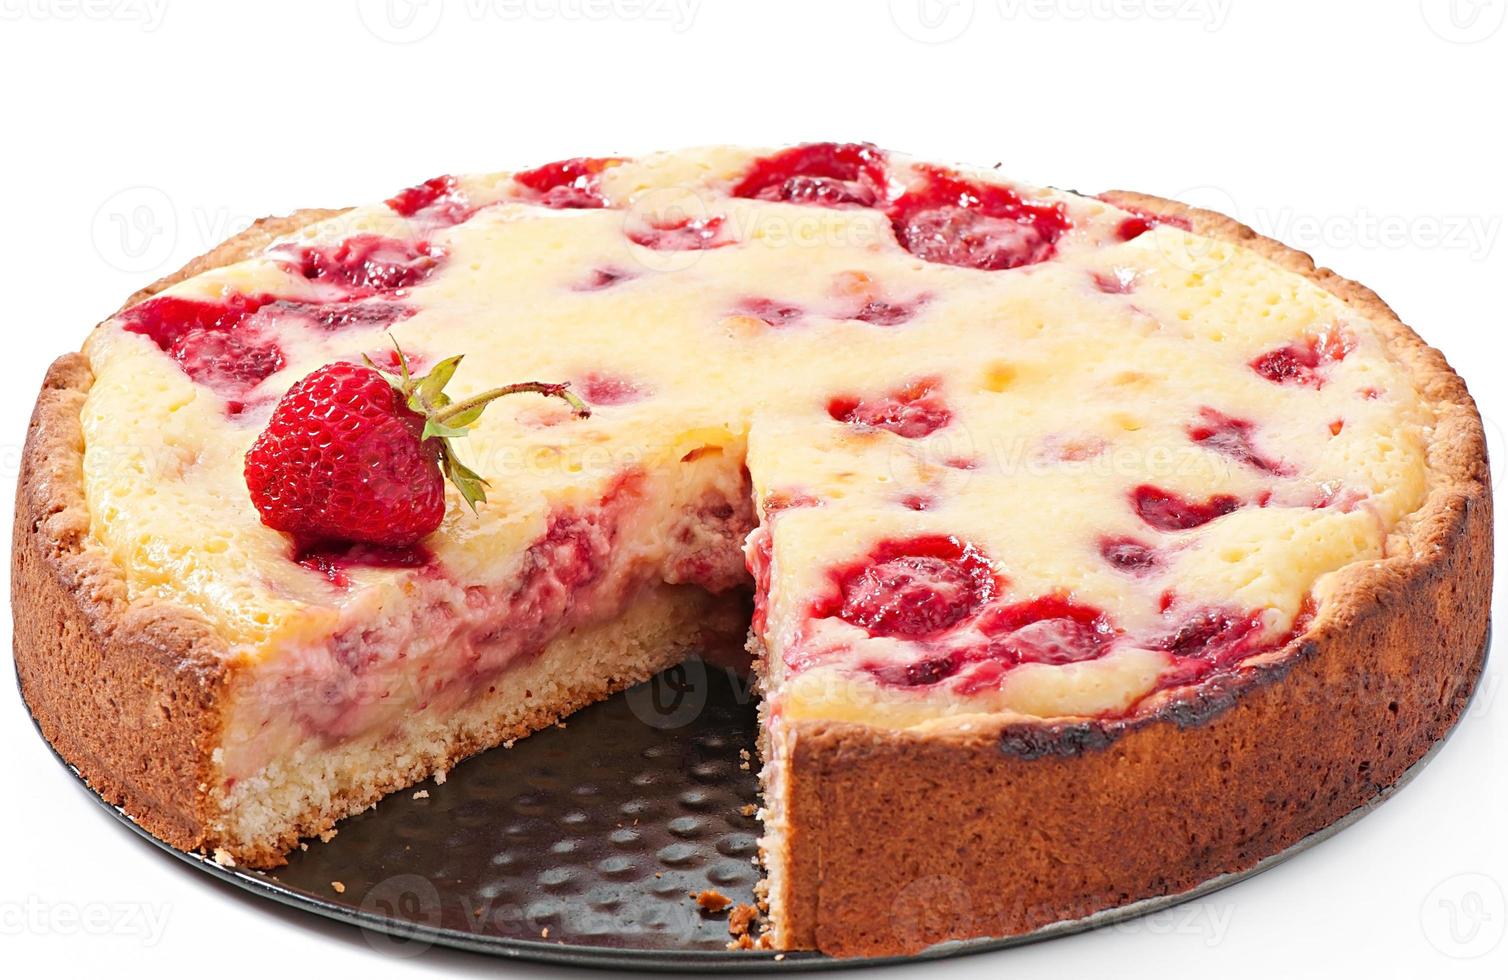 French pie  with strawberries photo